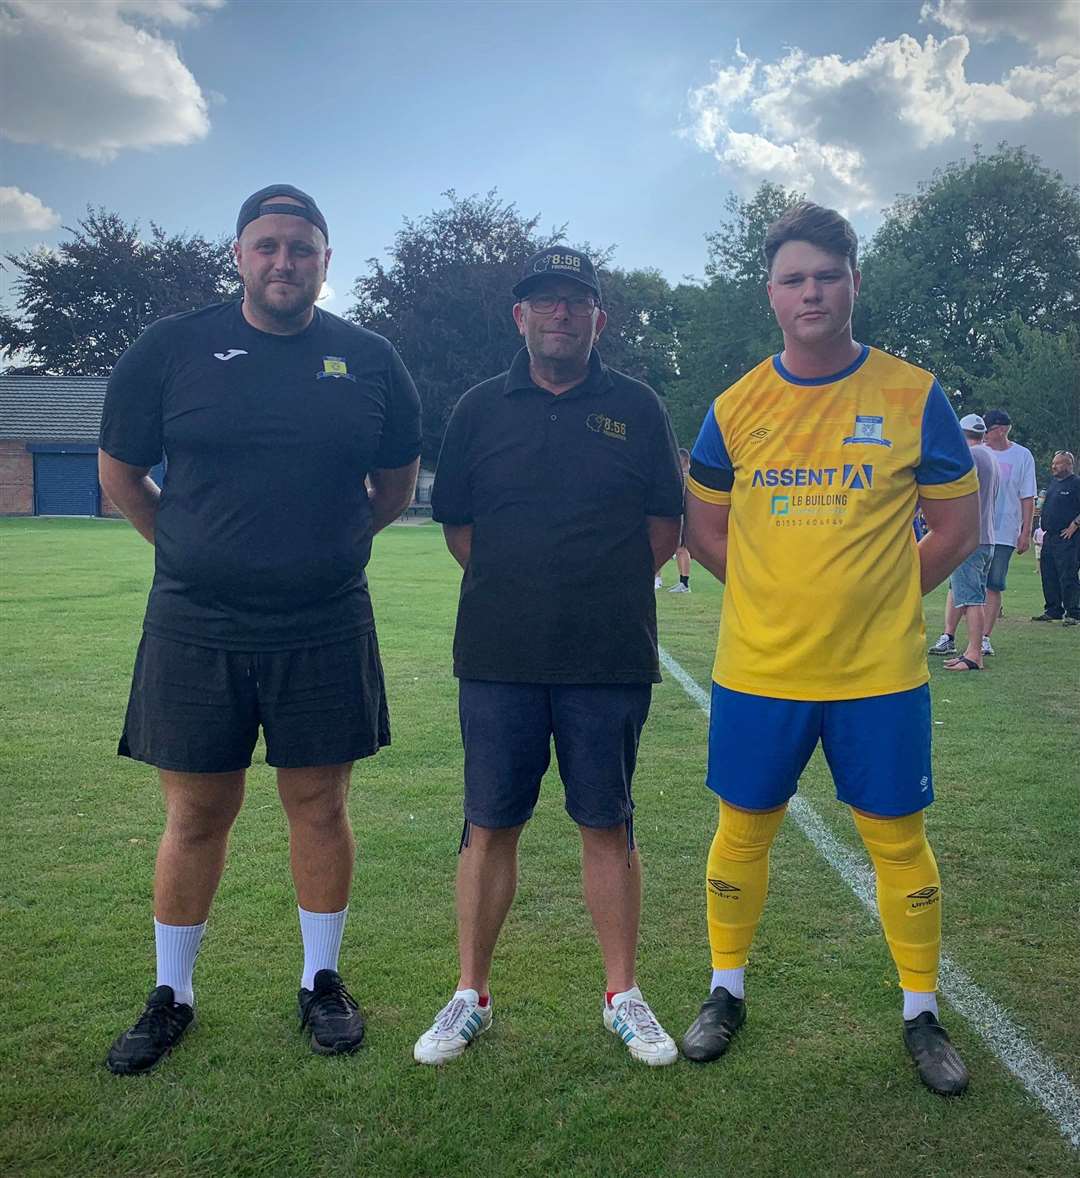 The 856 Foundation and Terrington FC show support for men's mental health at Saturday's fixture against Ingoldisthorpe Reserves